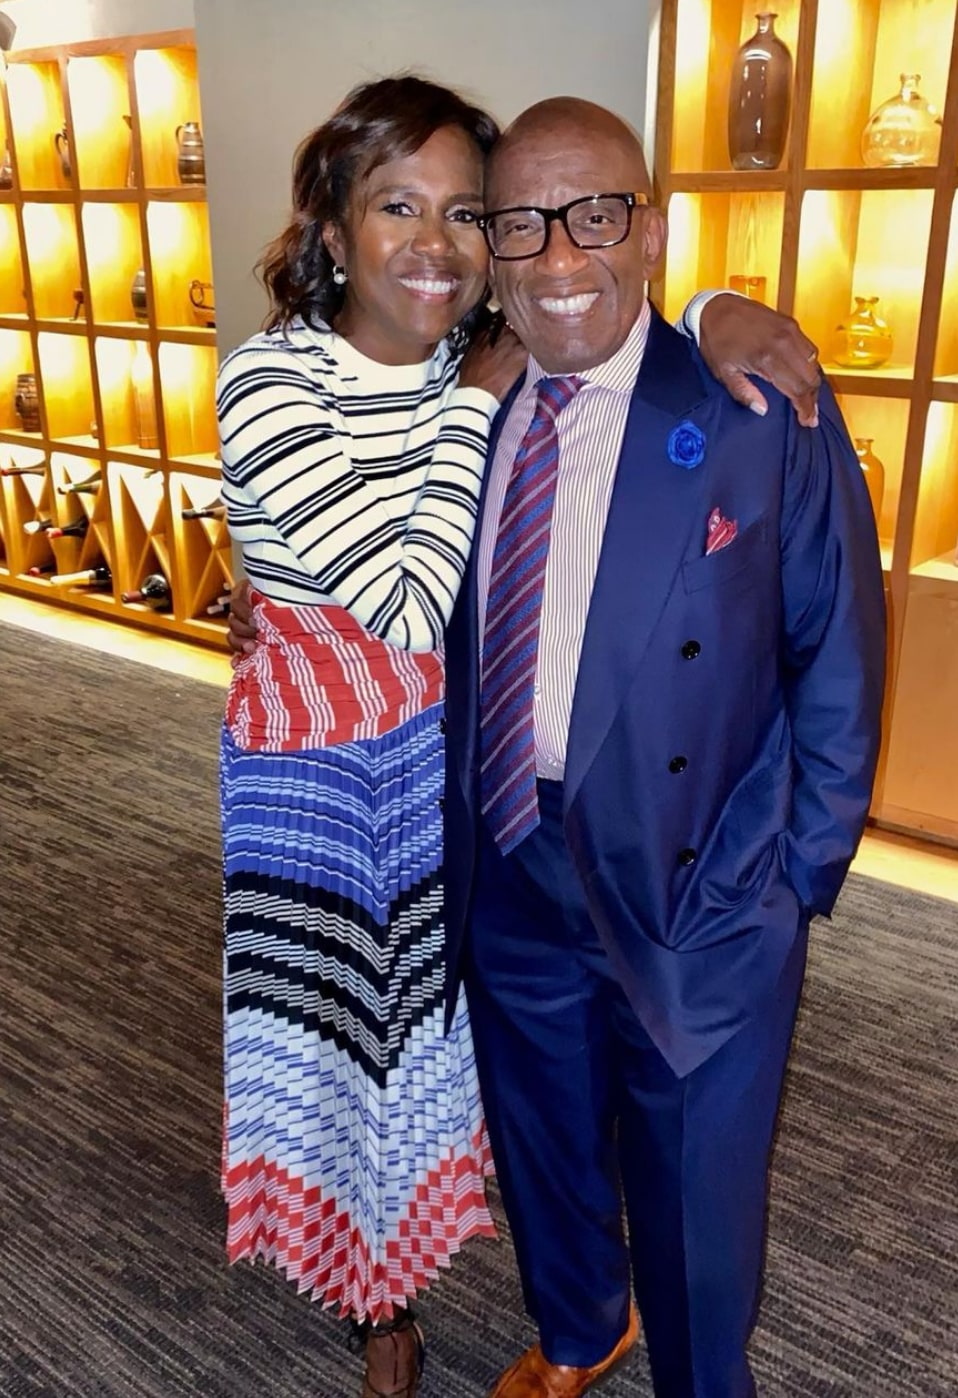 Photo shared by Deborah Roberts alongside her husband Al Roker while celebrating her new role as co-host of ABC's 20/20